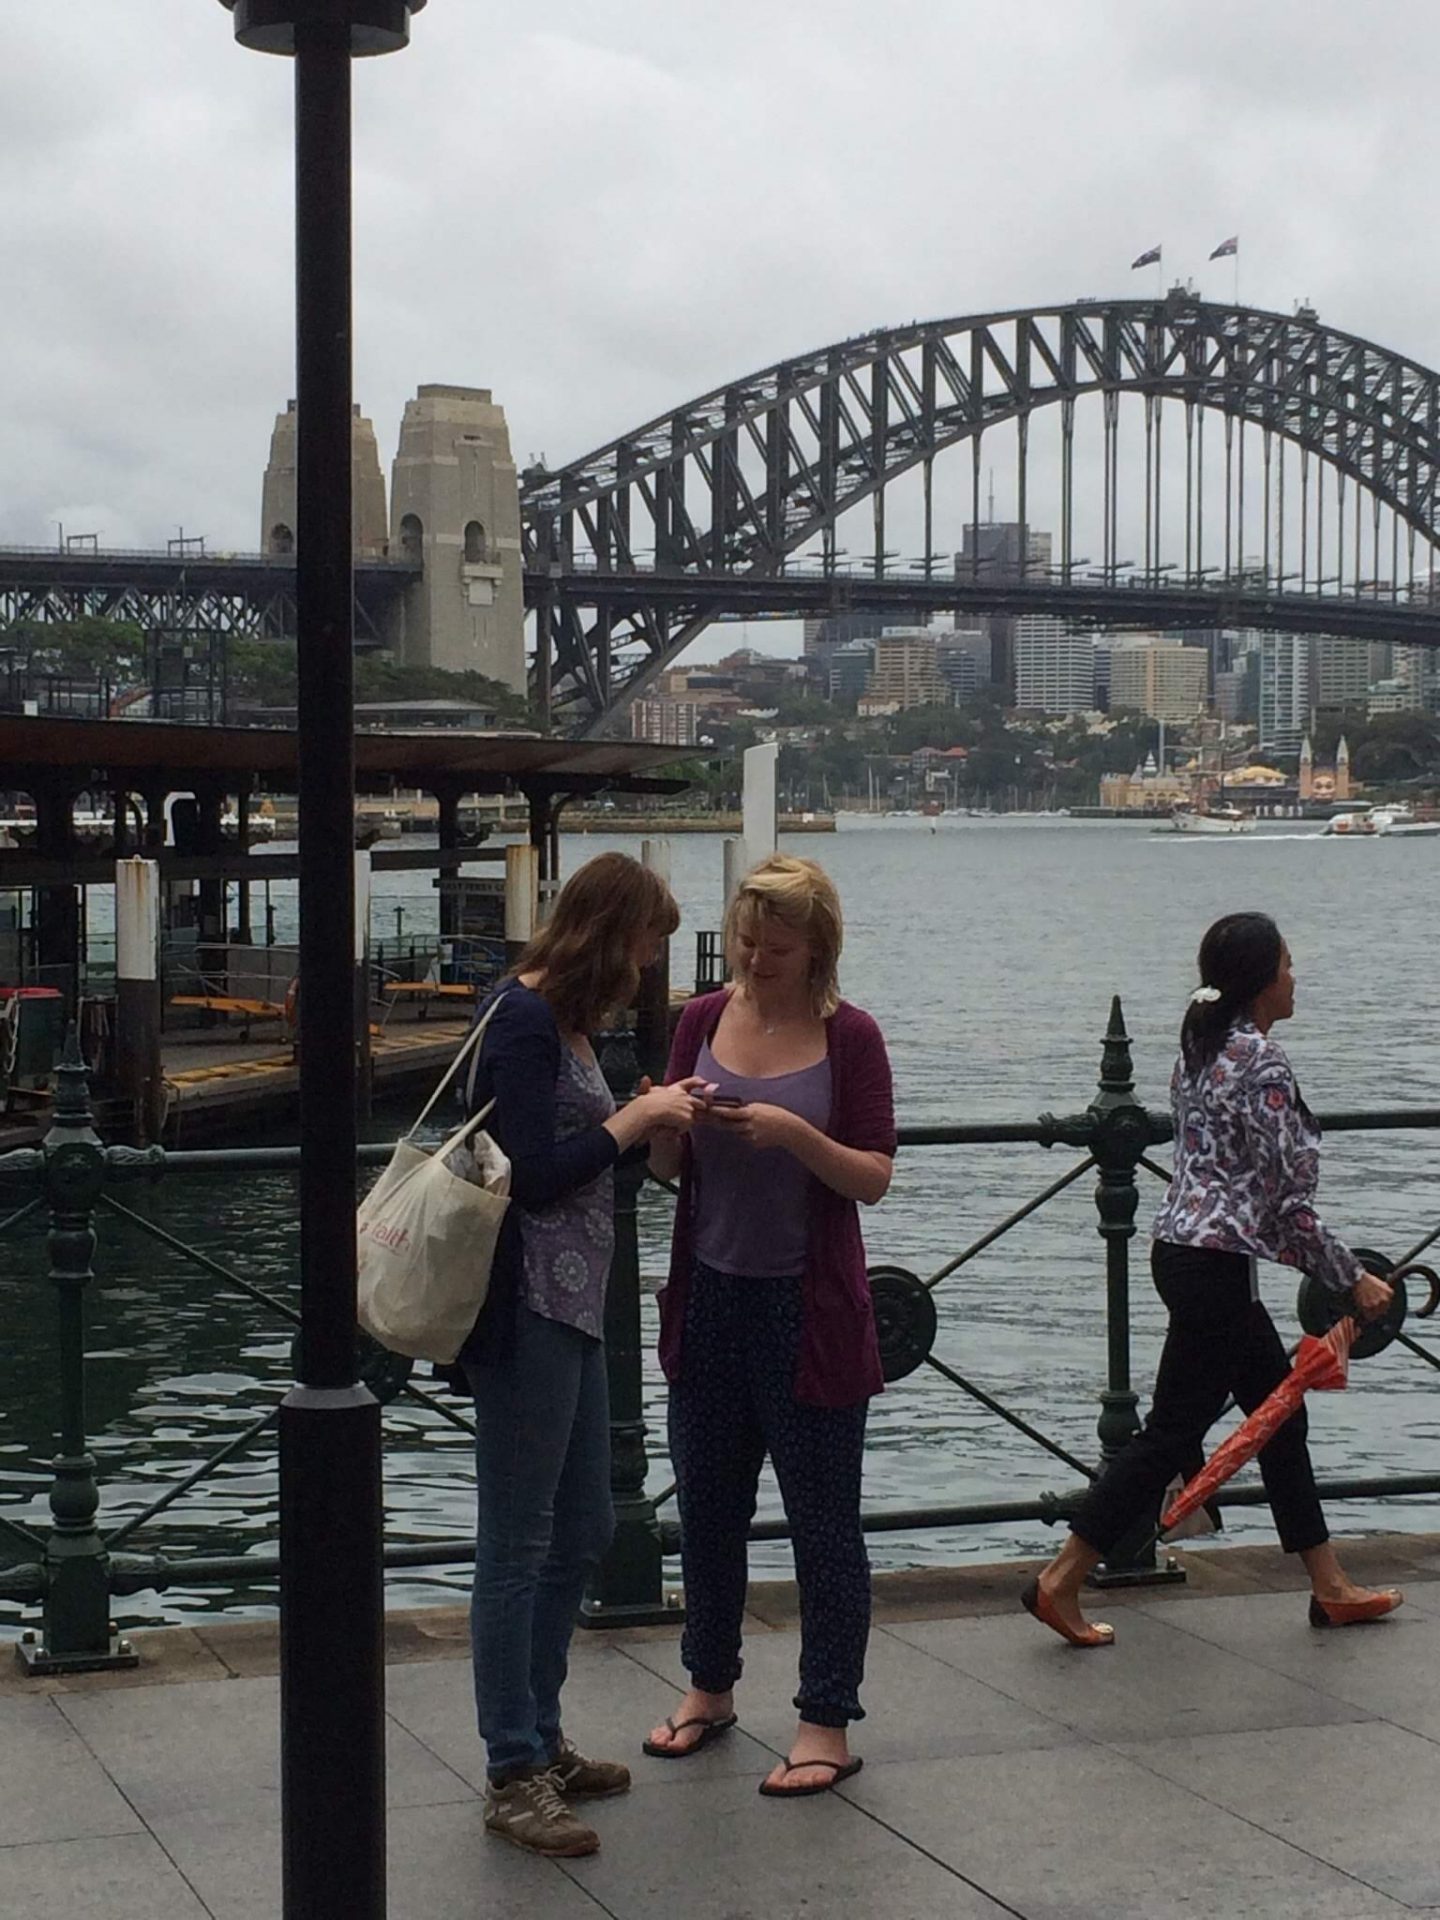 Laura and Mum with suitcases at Circular Quay, Sydney